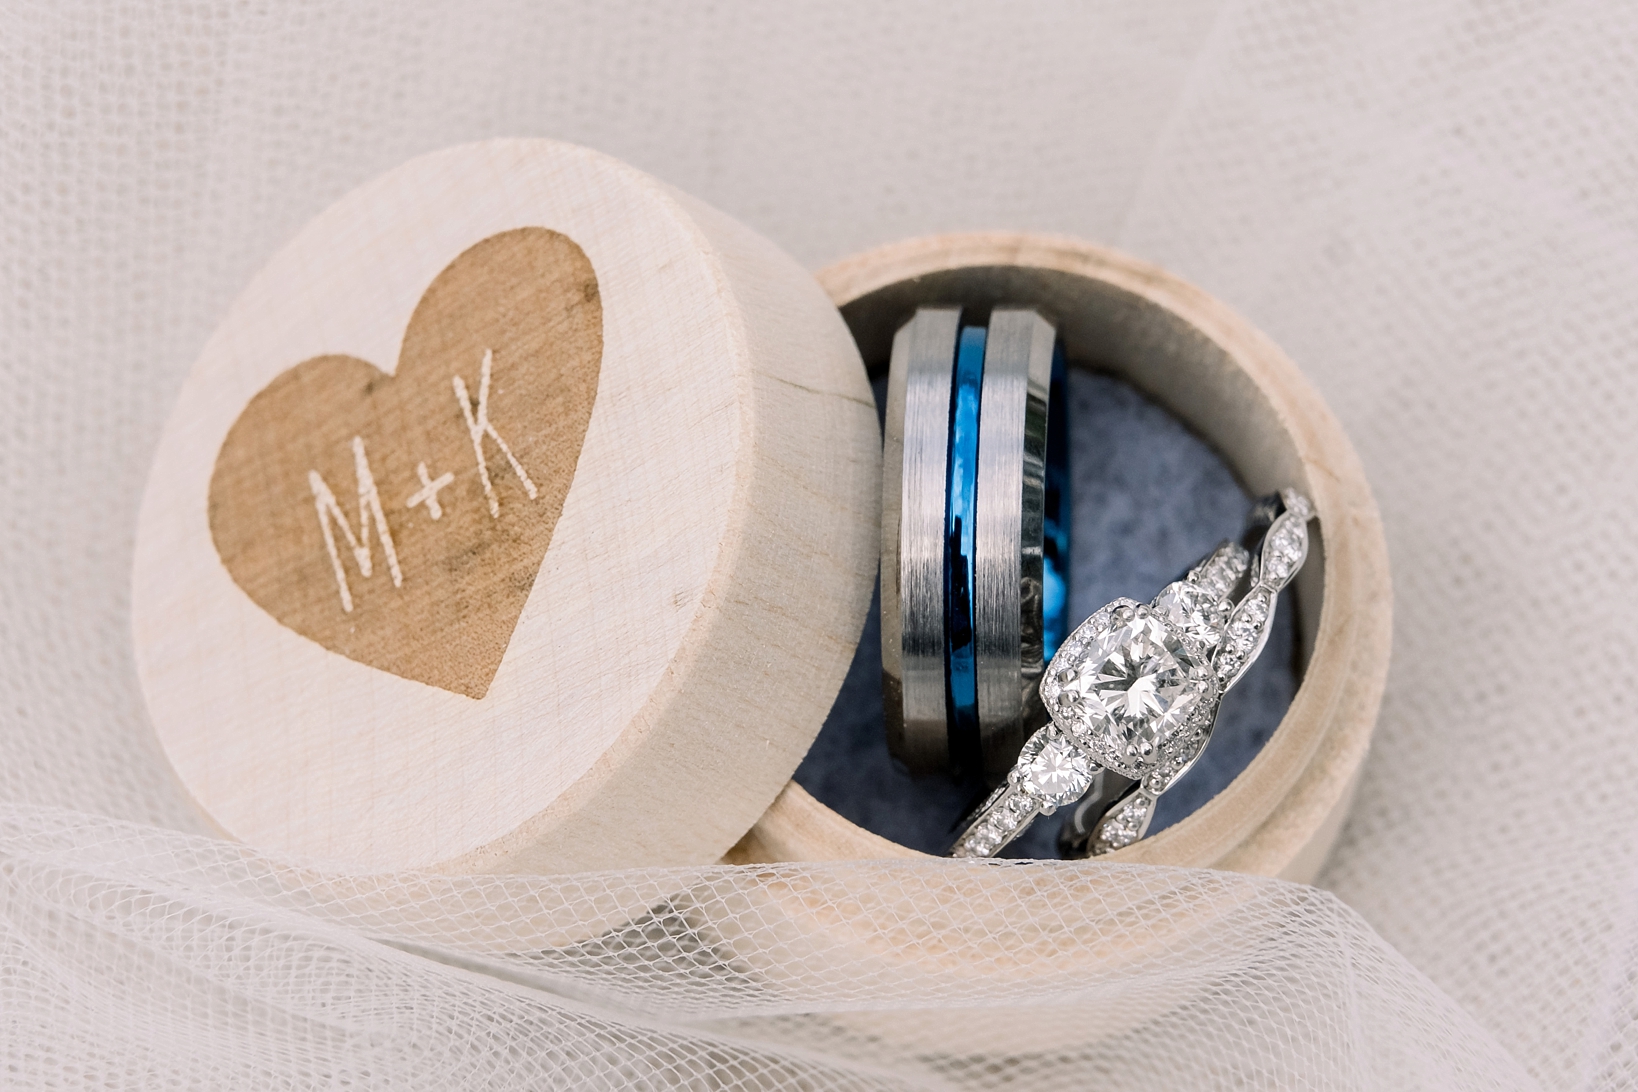 Th Bride and Grooms wedding rings in a custom wood box by Sarah & Ben Photography